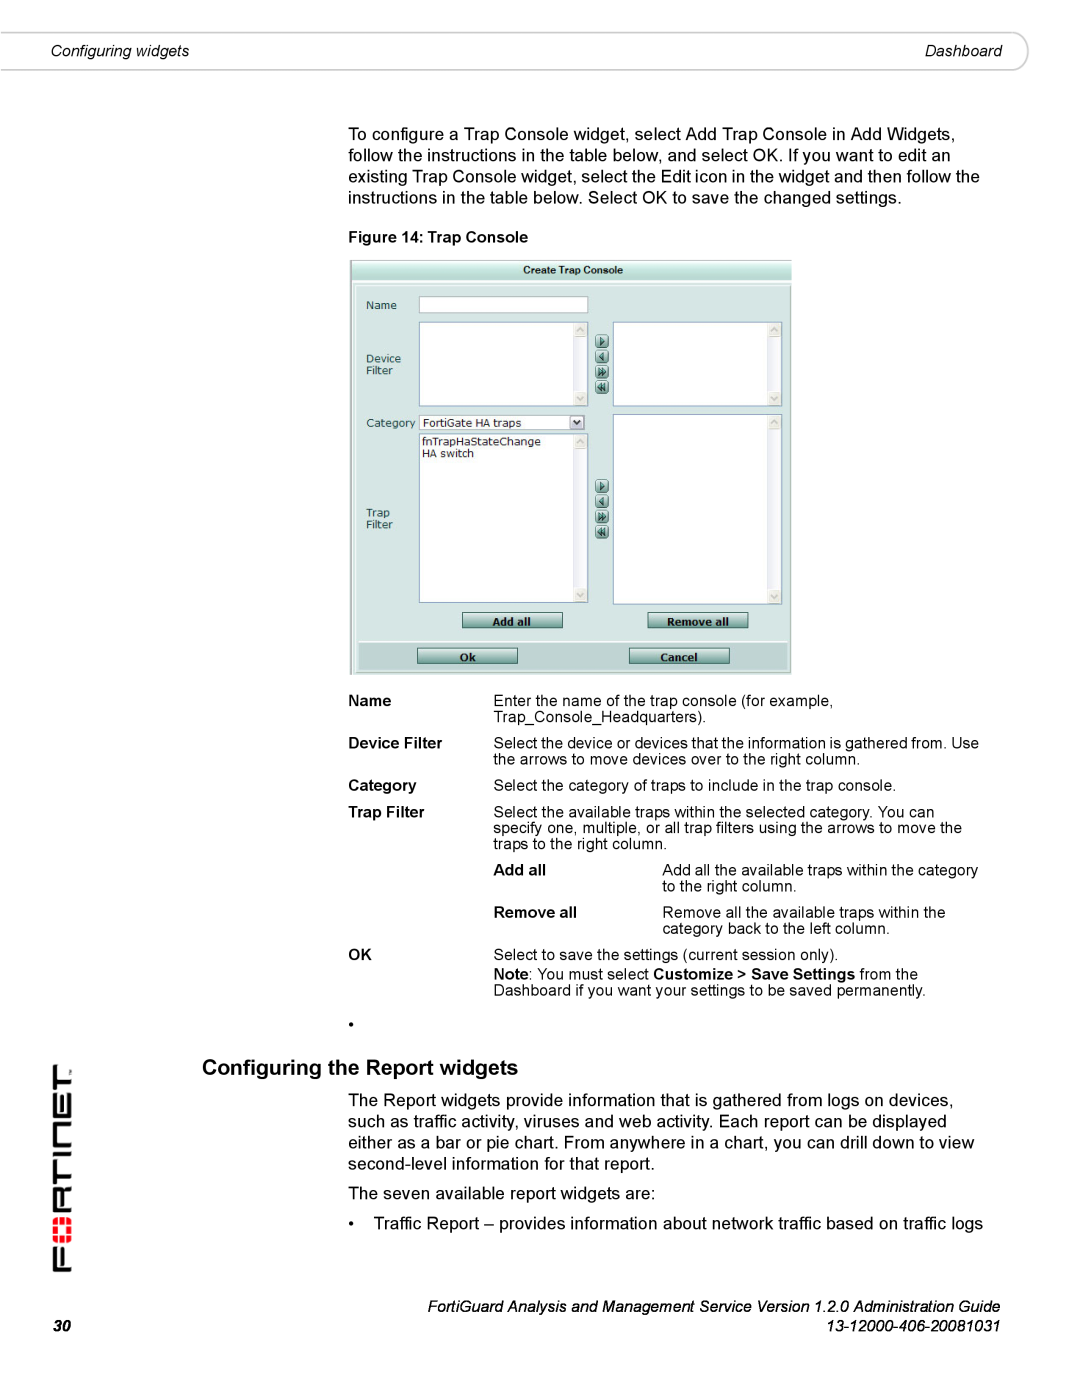 Fortinet 1.2.0 manual Configuring the Report widgets 